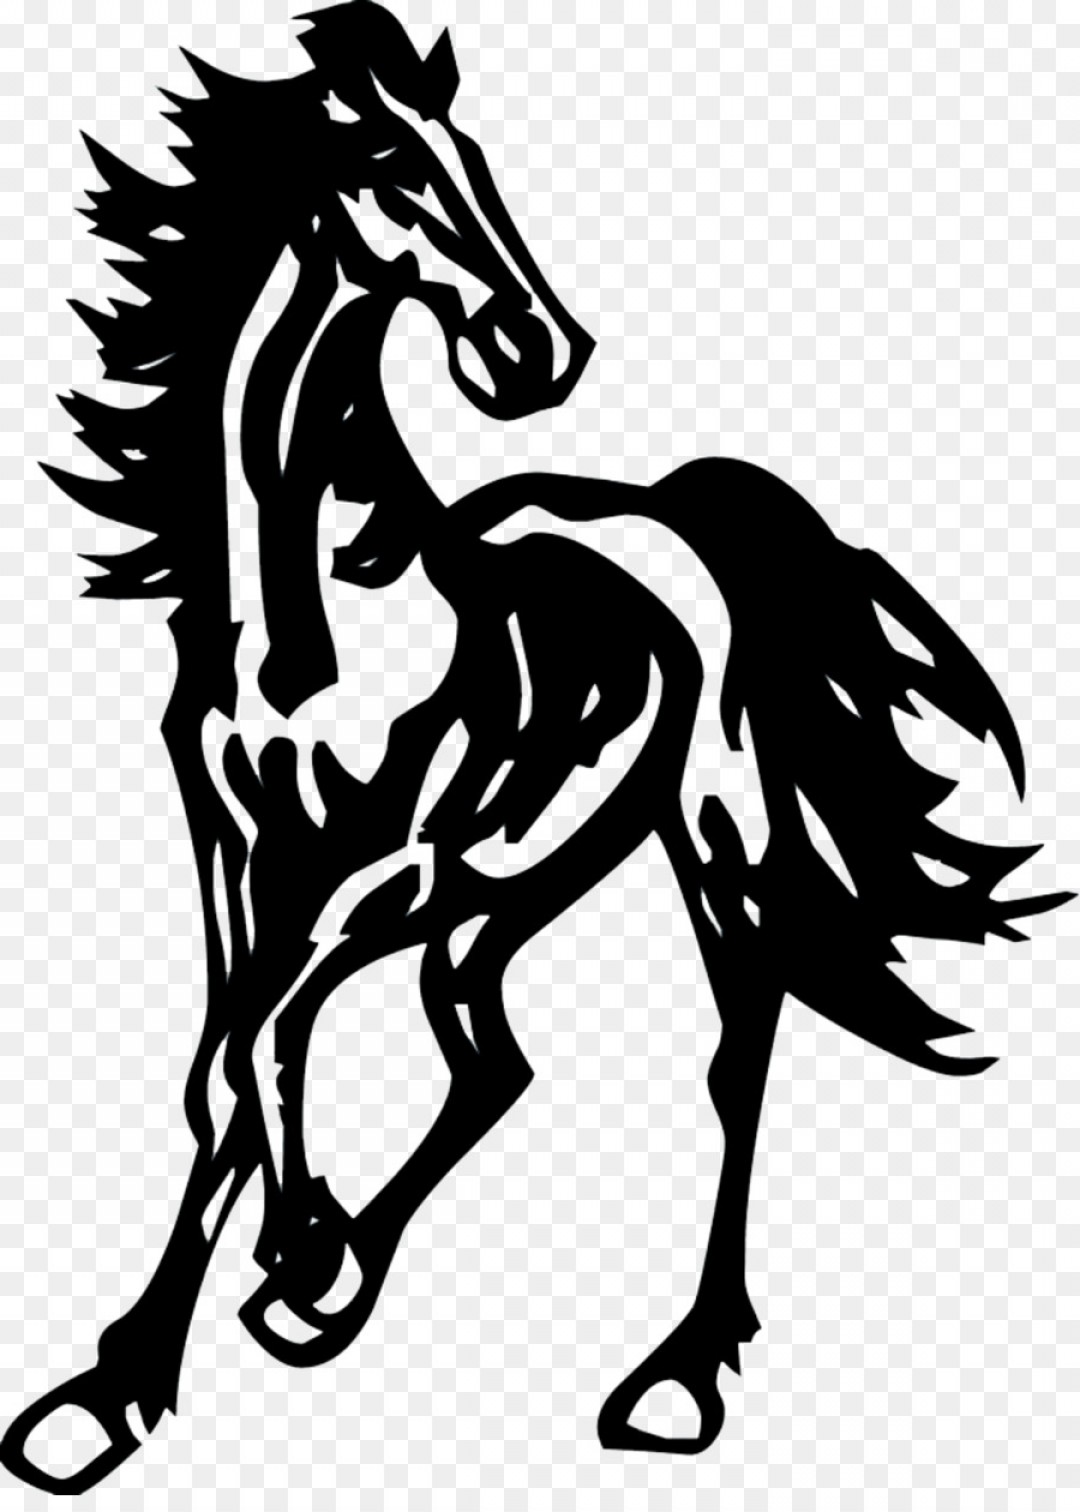 Png Horse Scalable Vector Graphics Autocad Dxf Clip Ar.